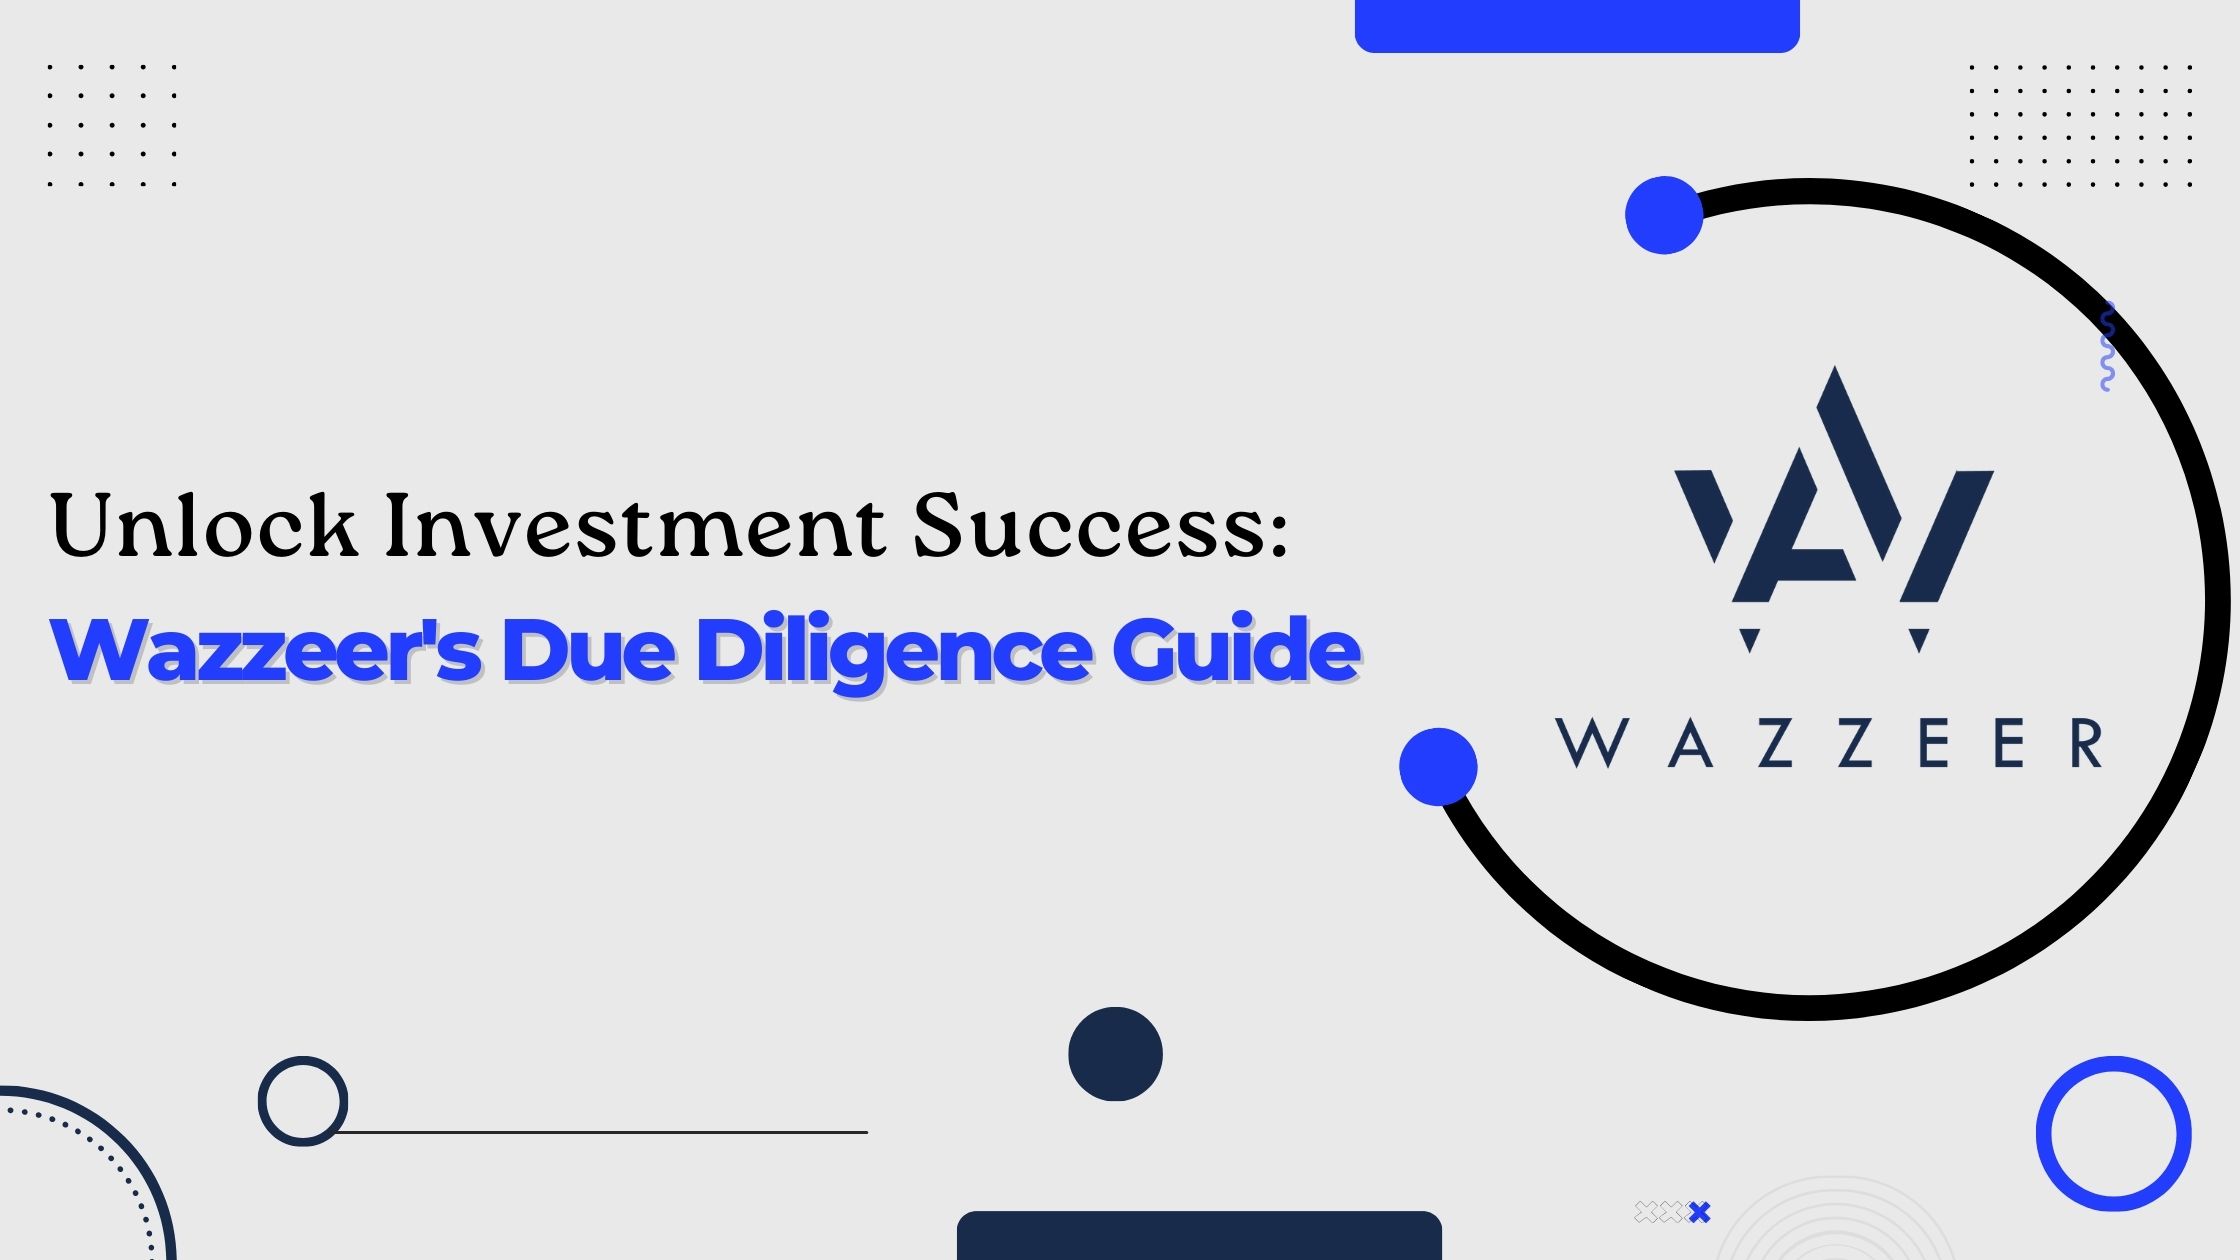 Unlock Investment Success: Wazzeer’s Due Diligence Guide